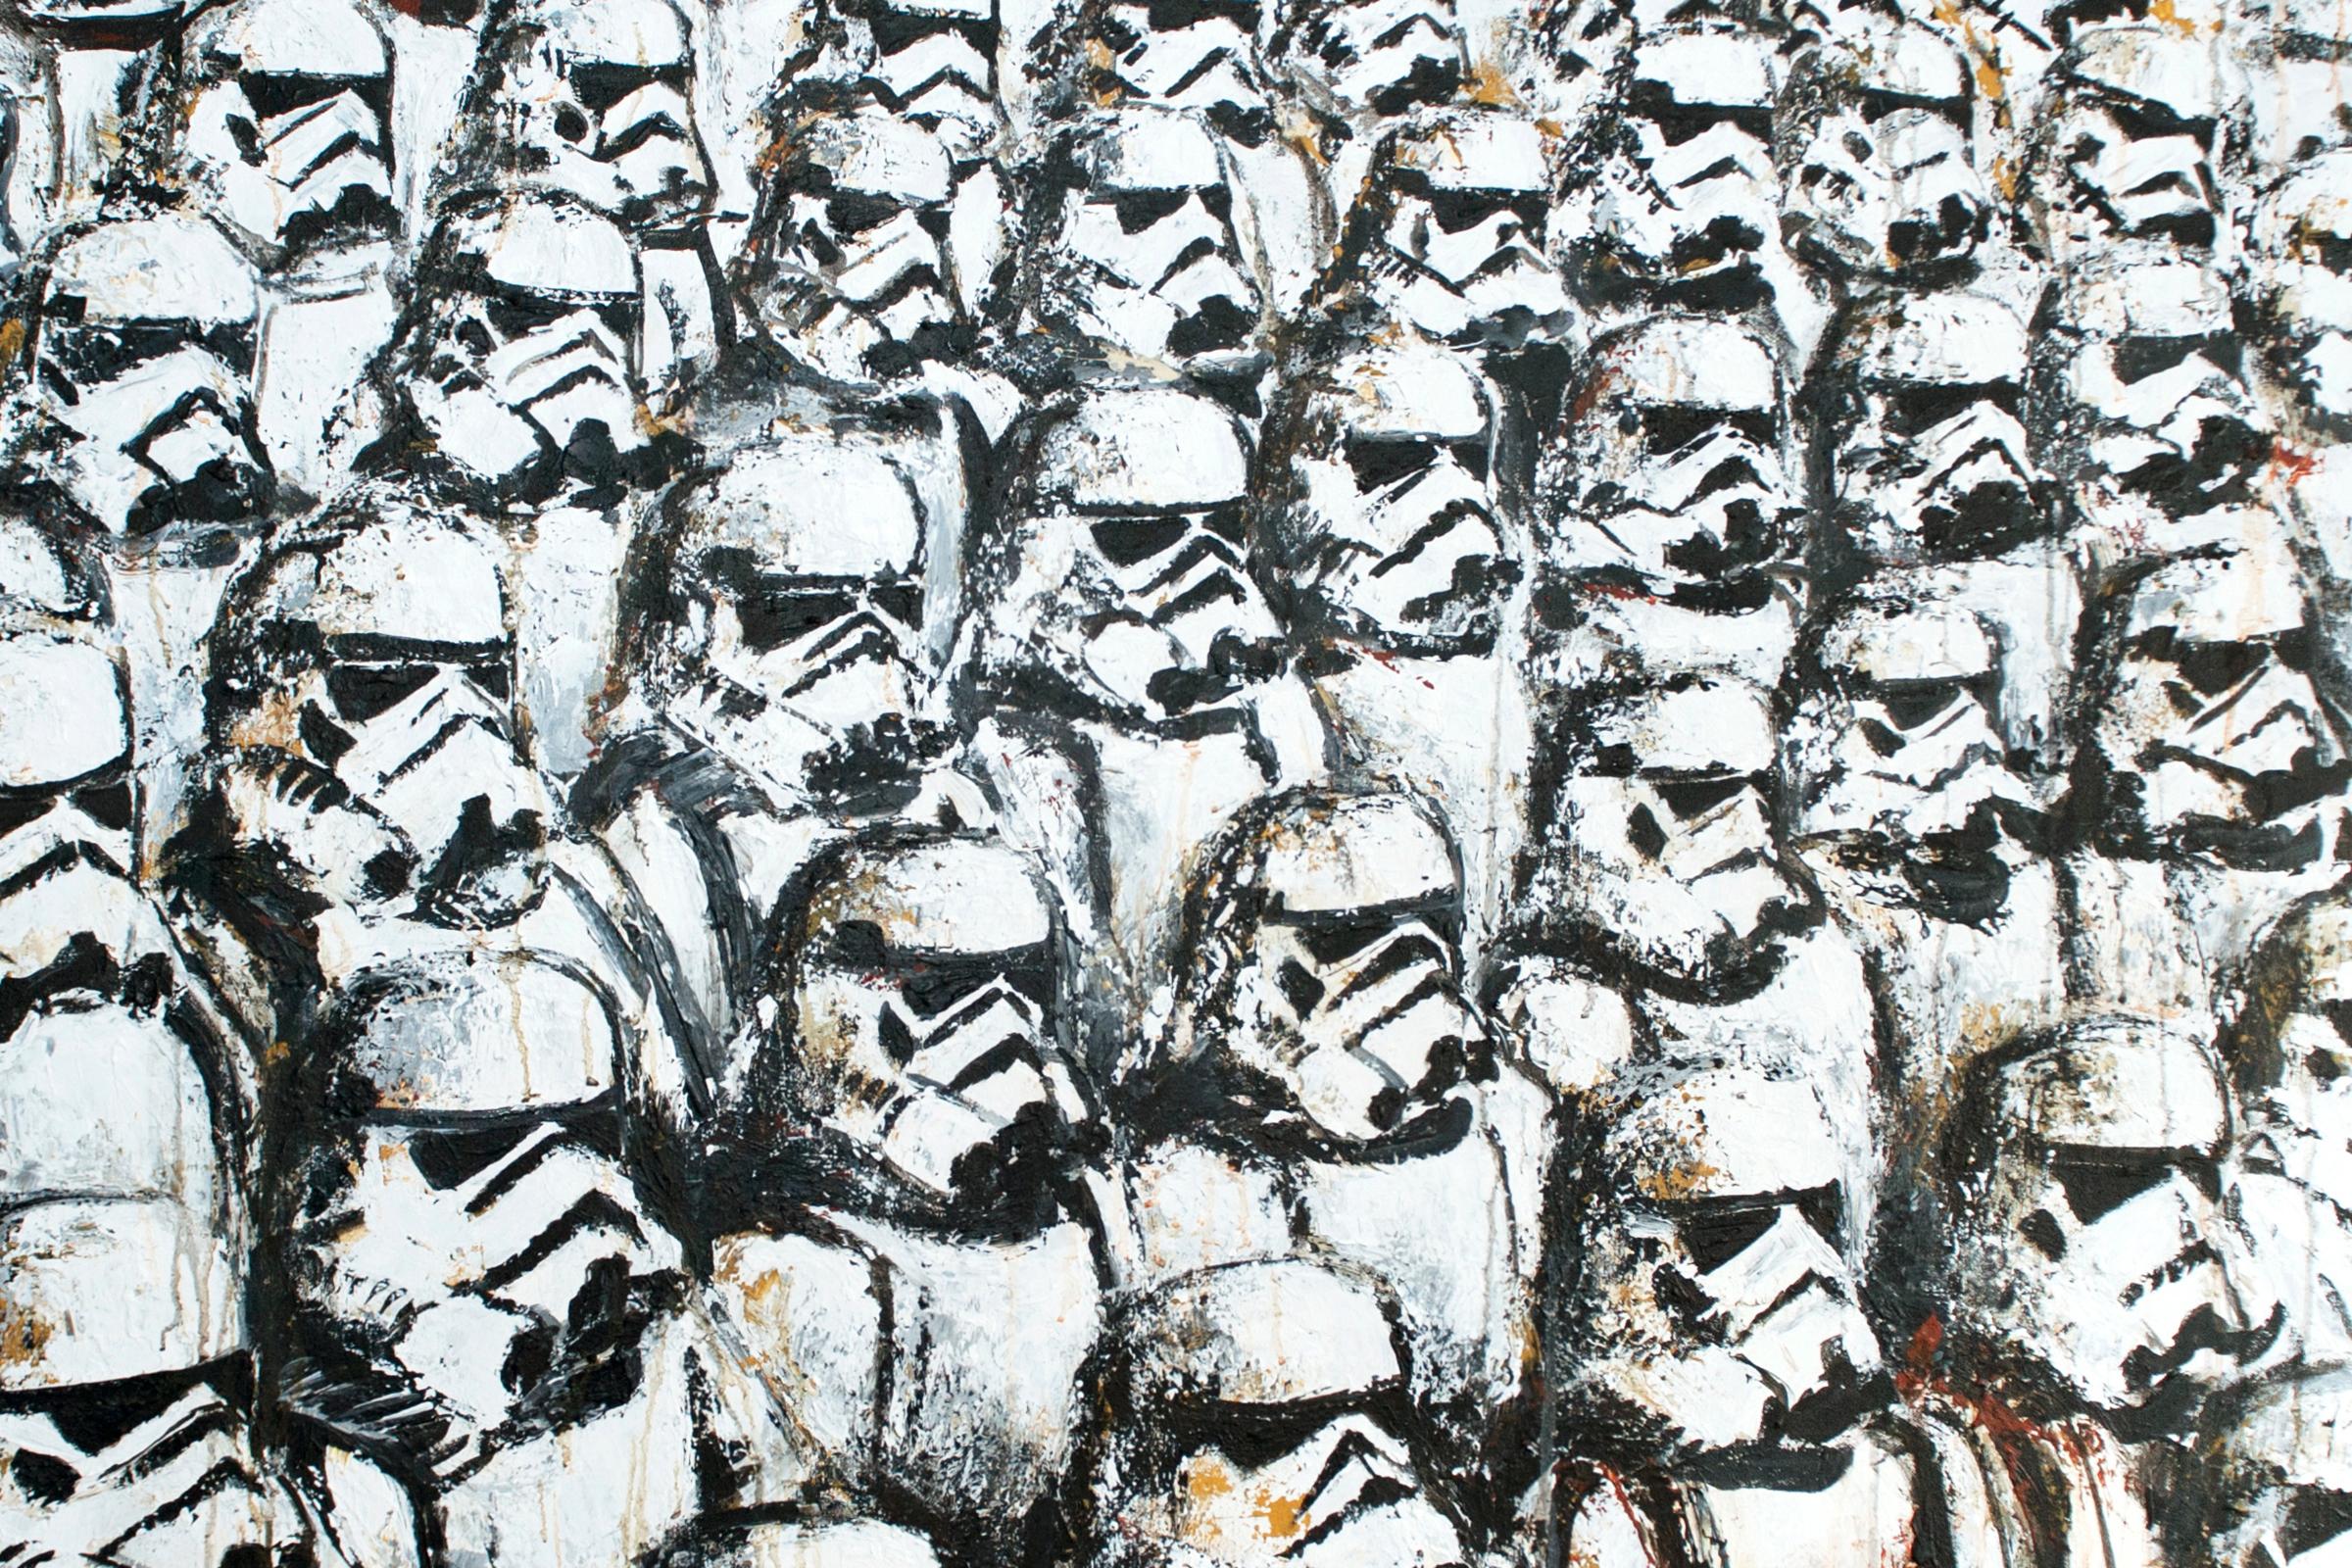 Painting Stormtroopers, acrylic paint on canvas,
unique piece painted by Olivia Fournier.